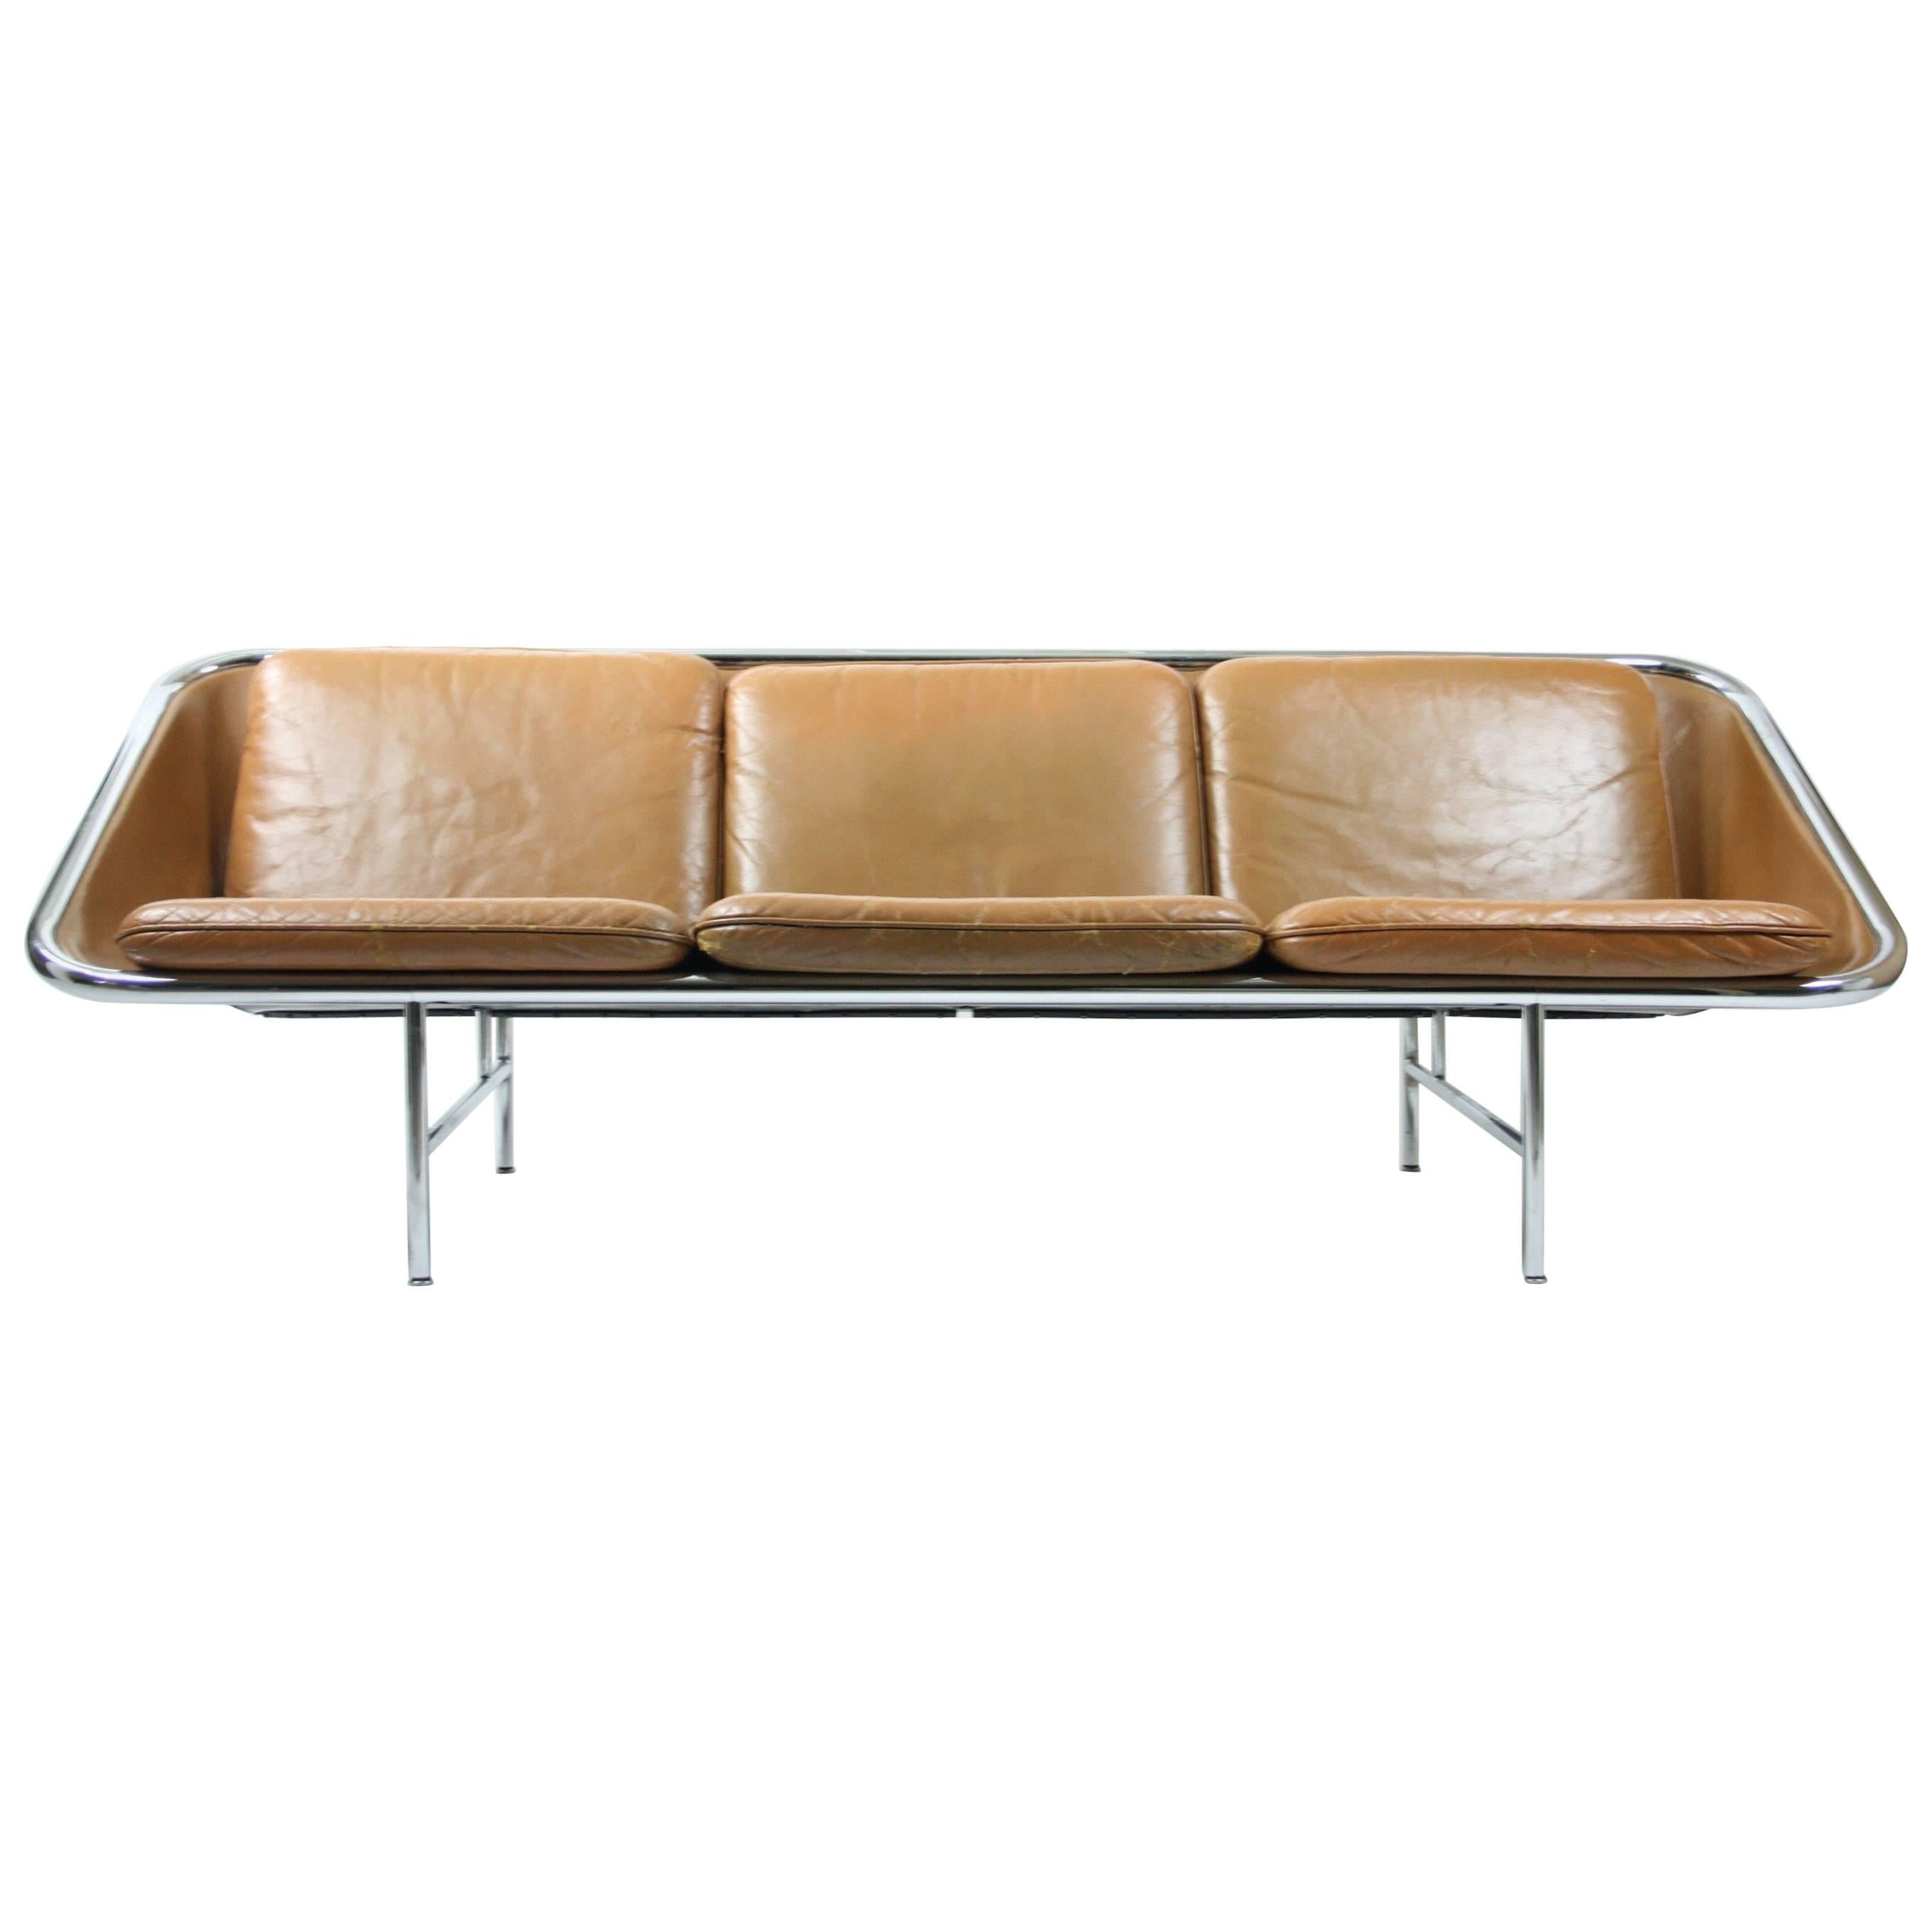 George Nelson Sling Sofa in Brown Leather for Herman Miller